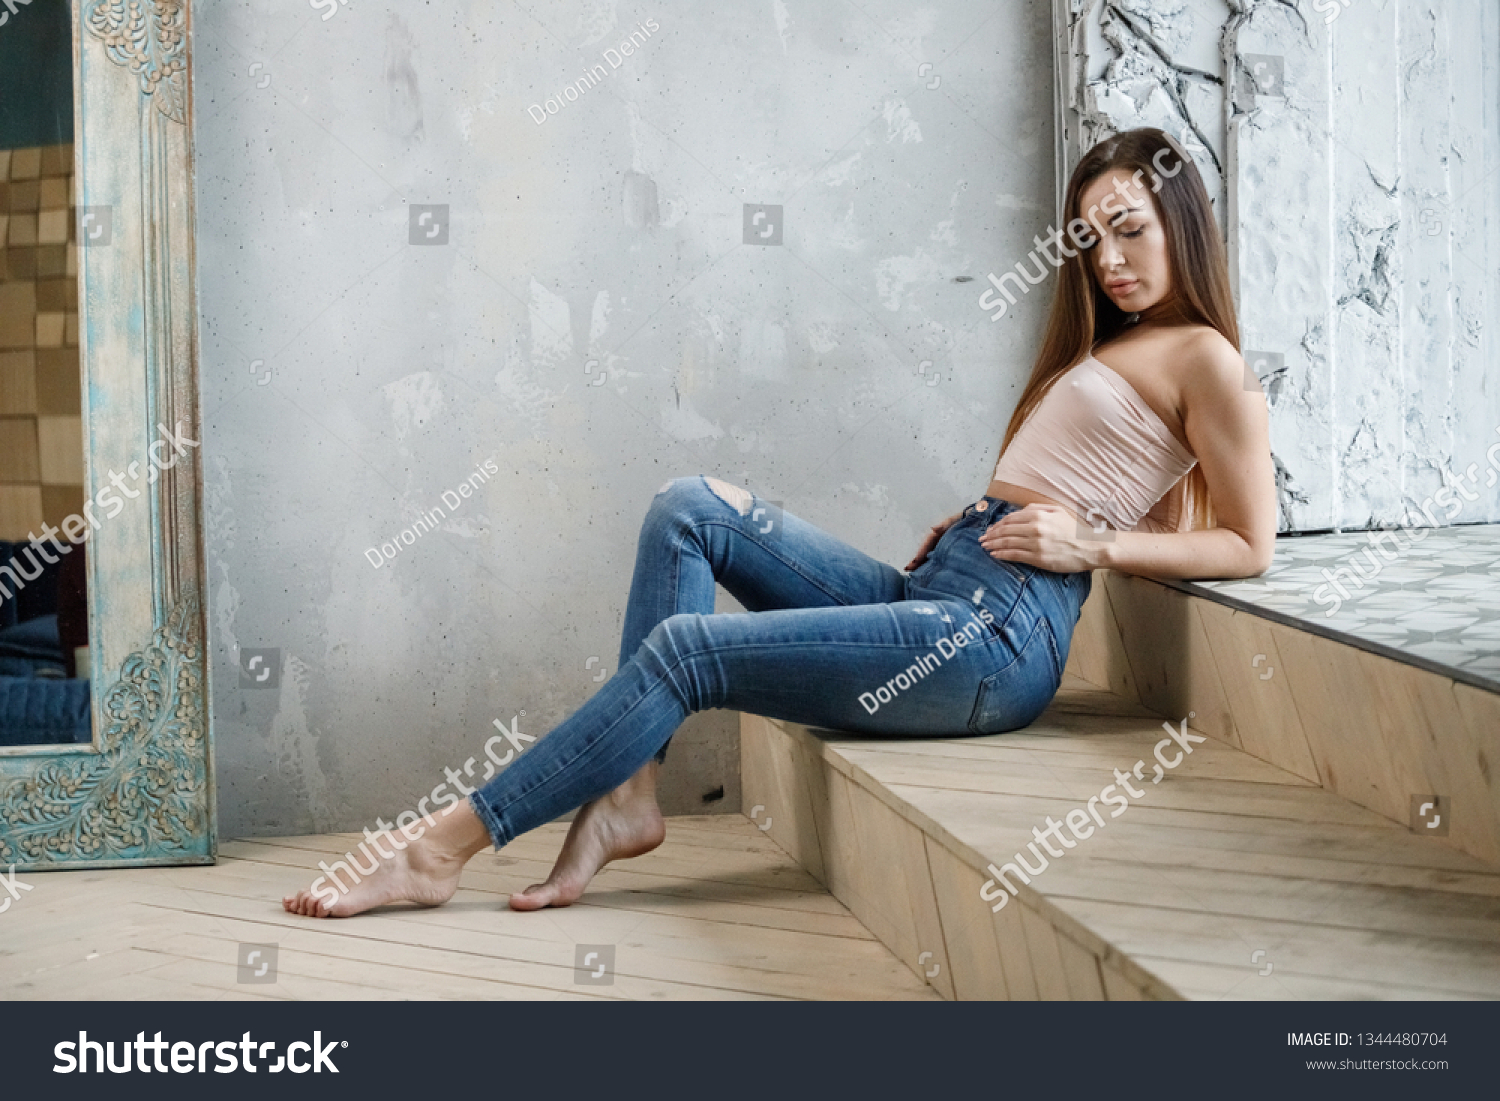 https://image.shutterstock.com/shutterstock/photos/1344480704/display_1500/stock-photo-beautiful-girl-sexy-brunette-in-jeans-and-t-shirt-posing-in-a-room-in-the-interior-1344480704.jpg